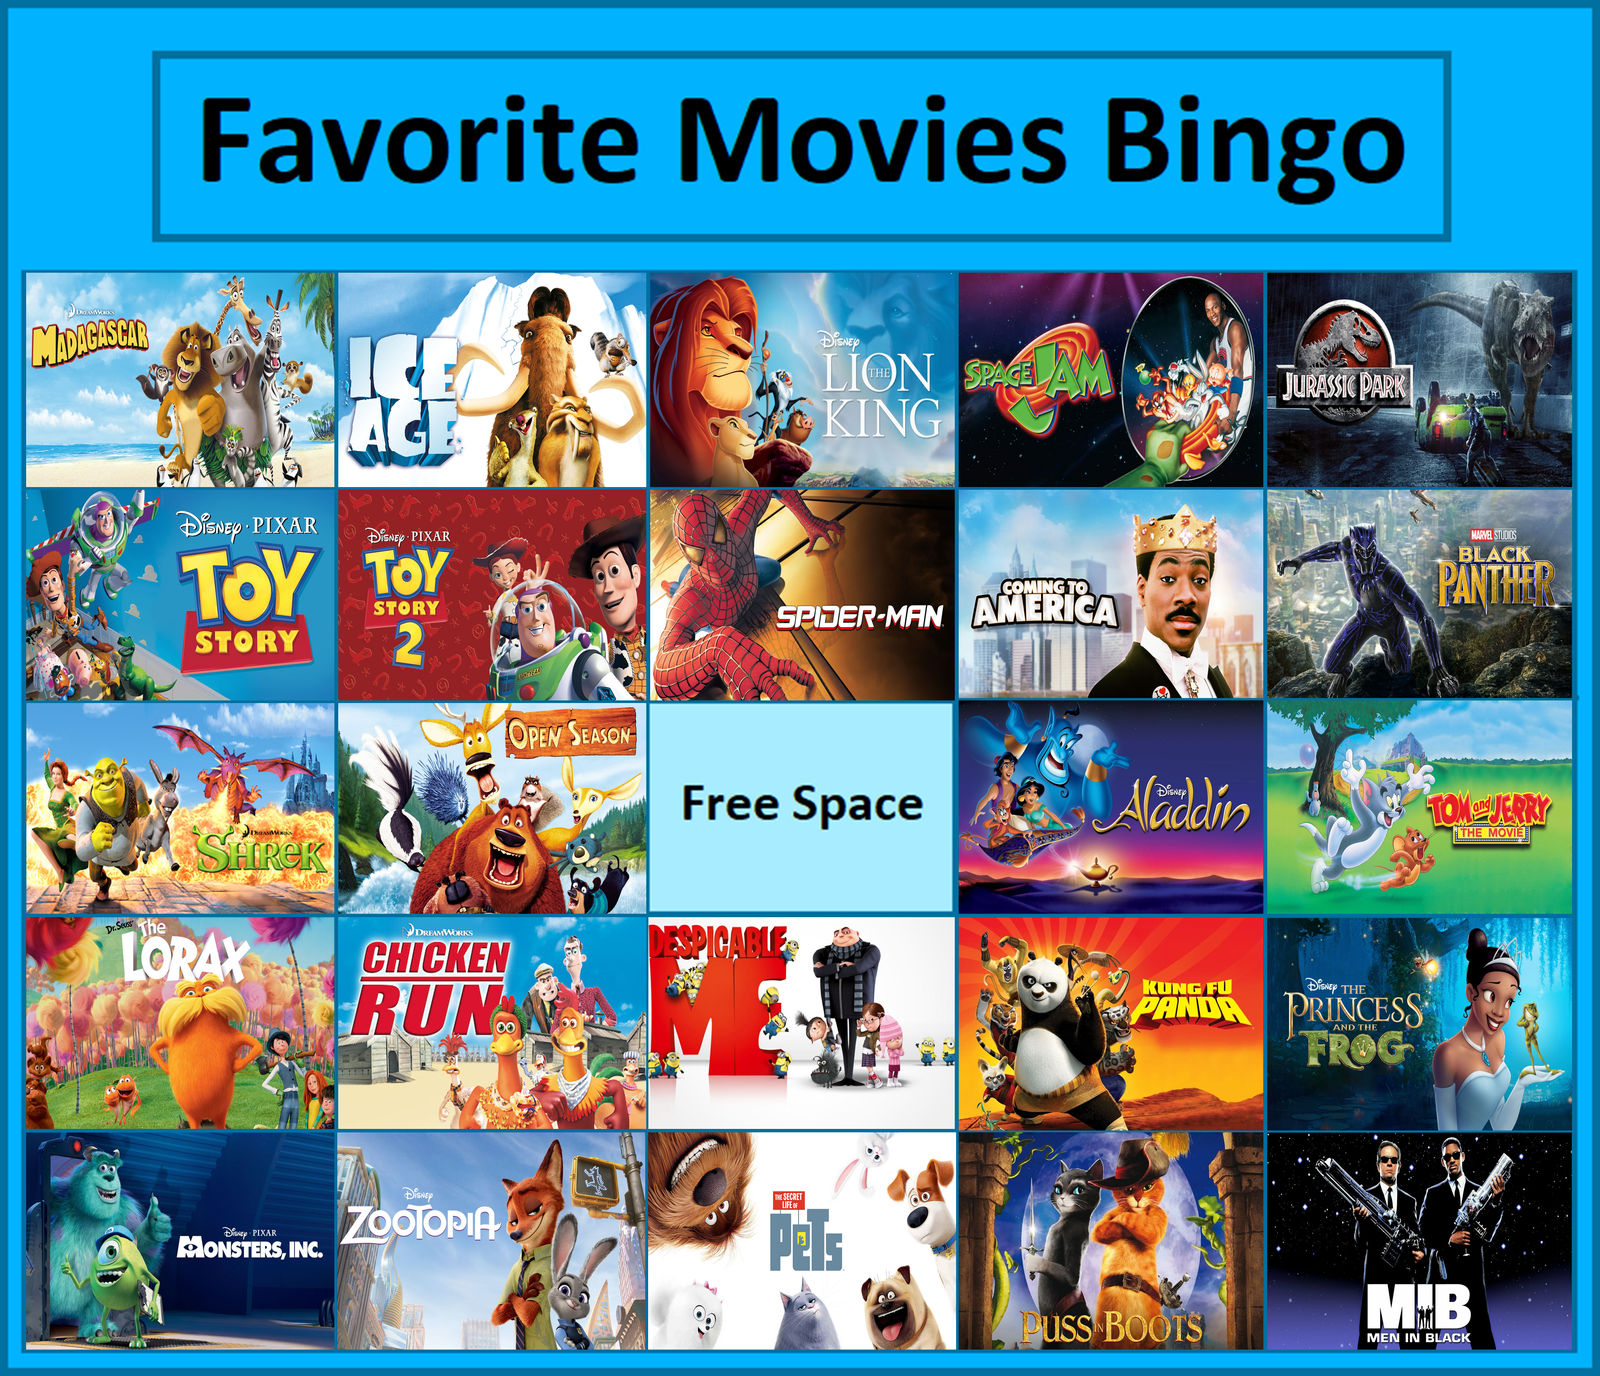 13 Best Resultados do jogo do bicho ideas  loteria, mayan numbers,  madagascar movie characters